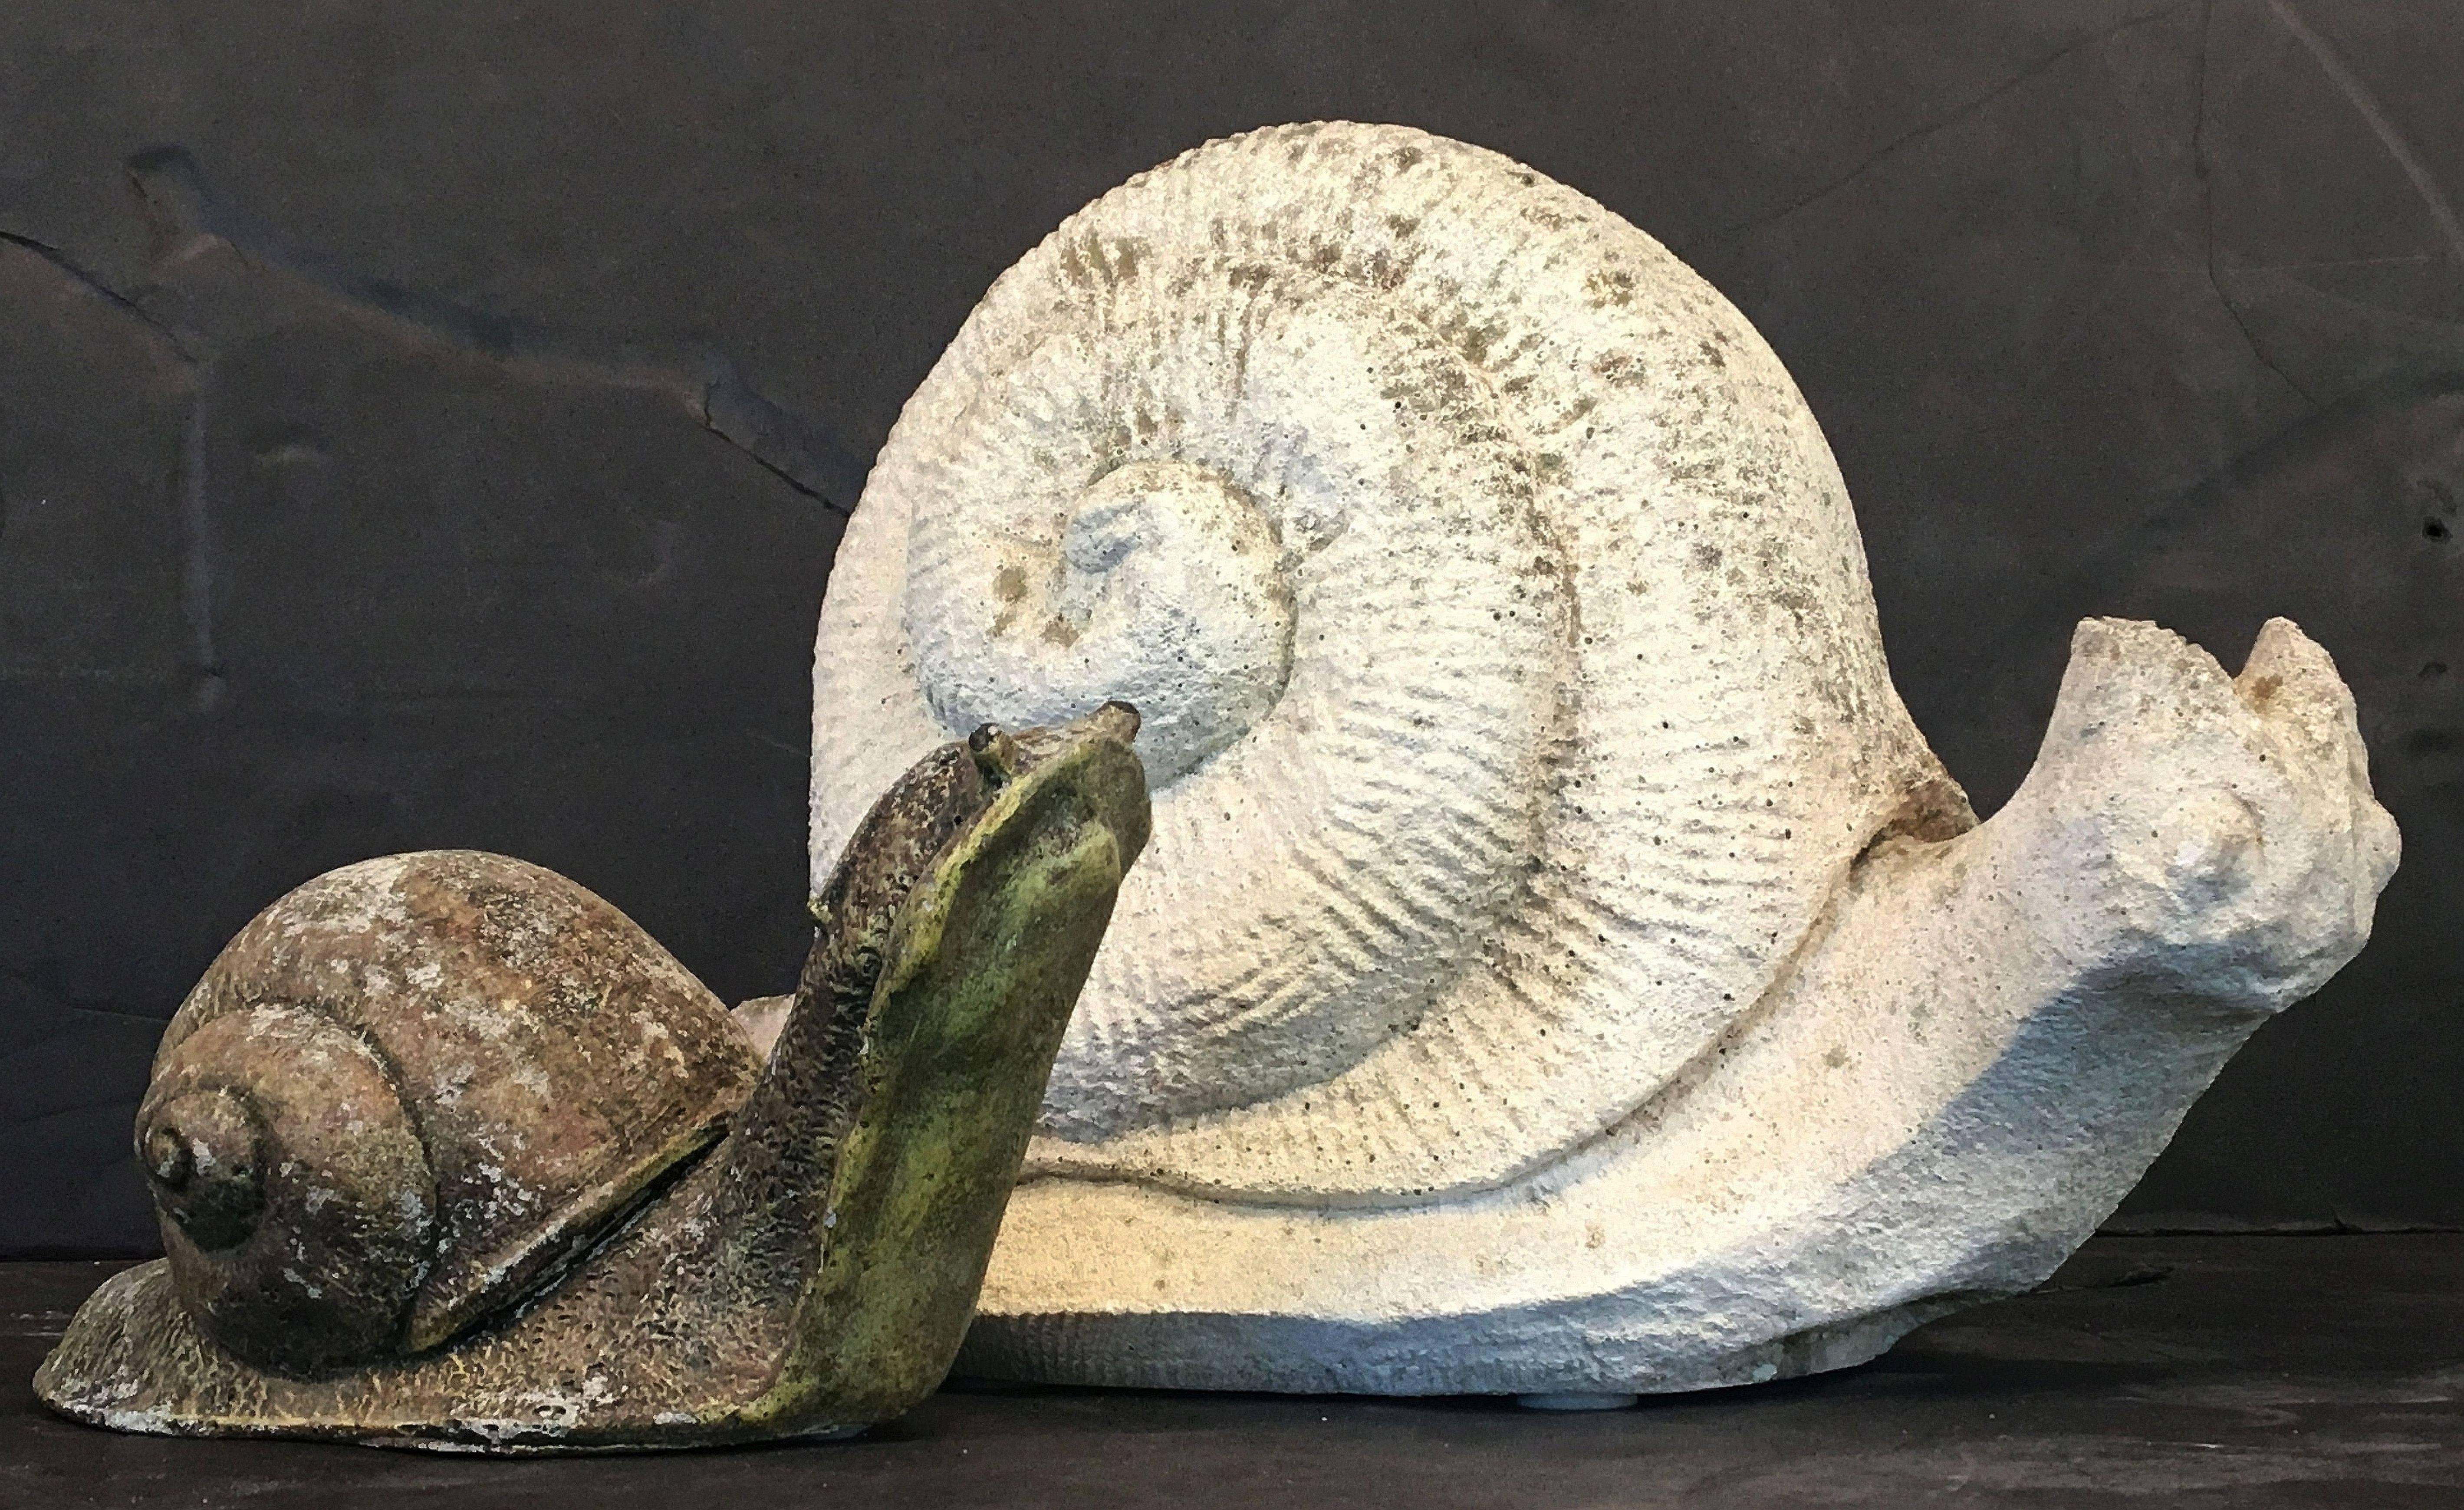 A large English garden ornamental snail of composition stone.

Perfect for a garden room or conservatory!